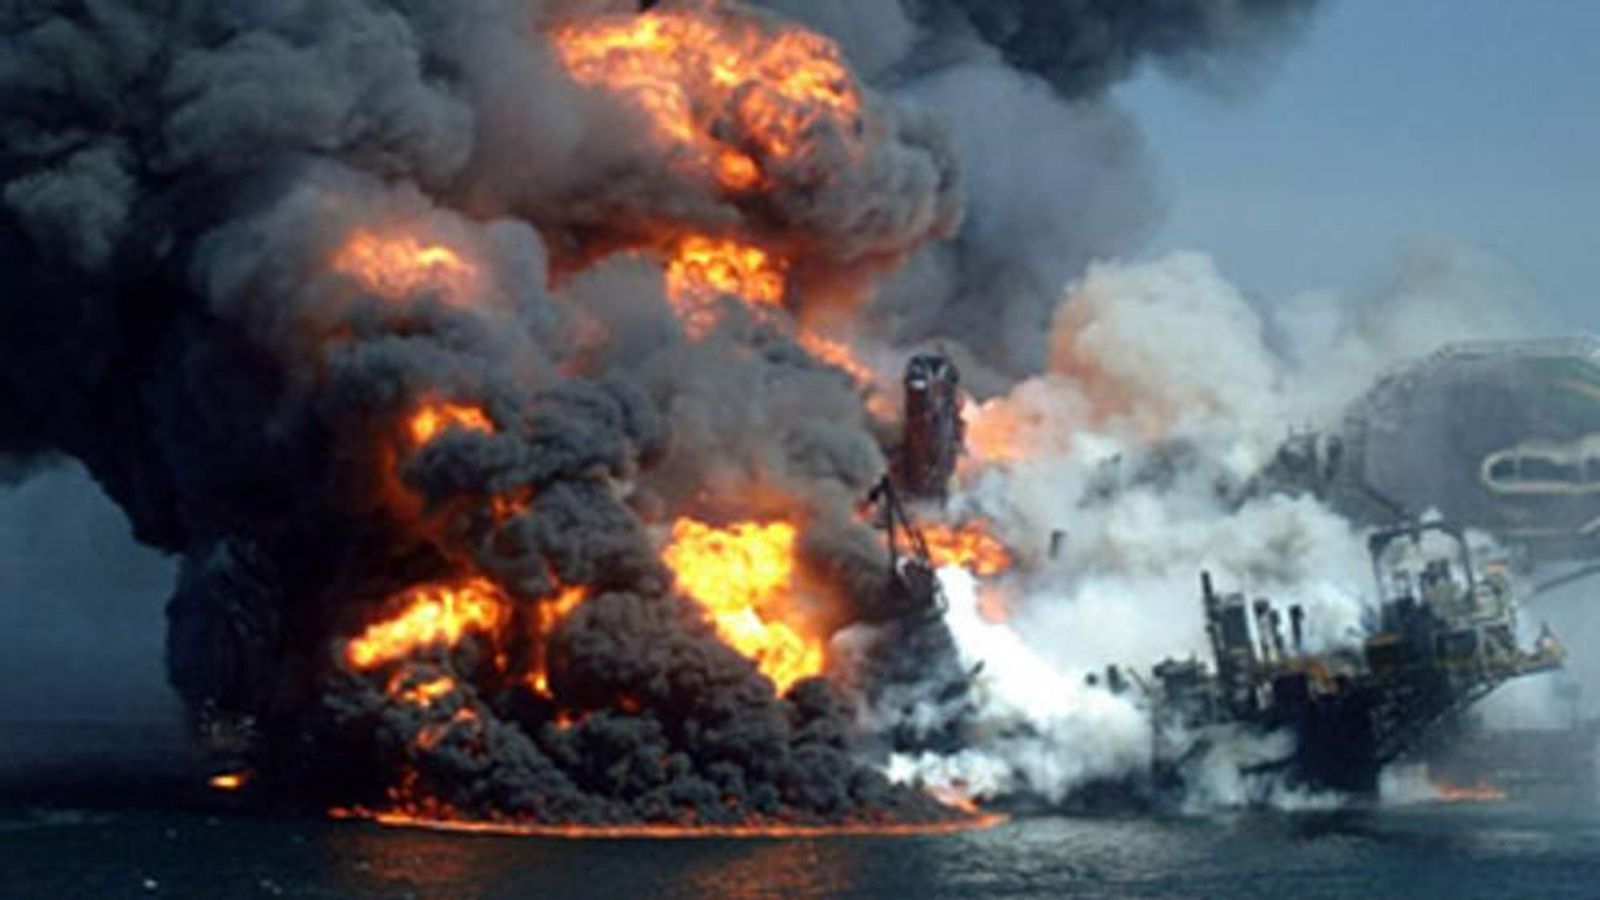 BP Oil Spill Report Identifies Who To Blame